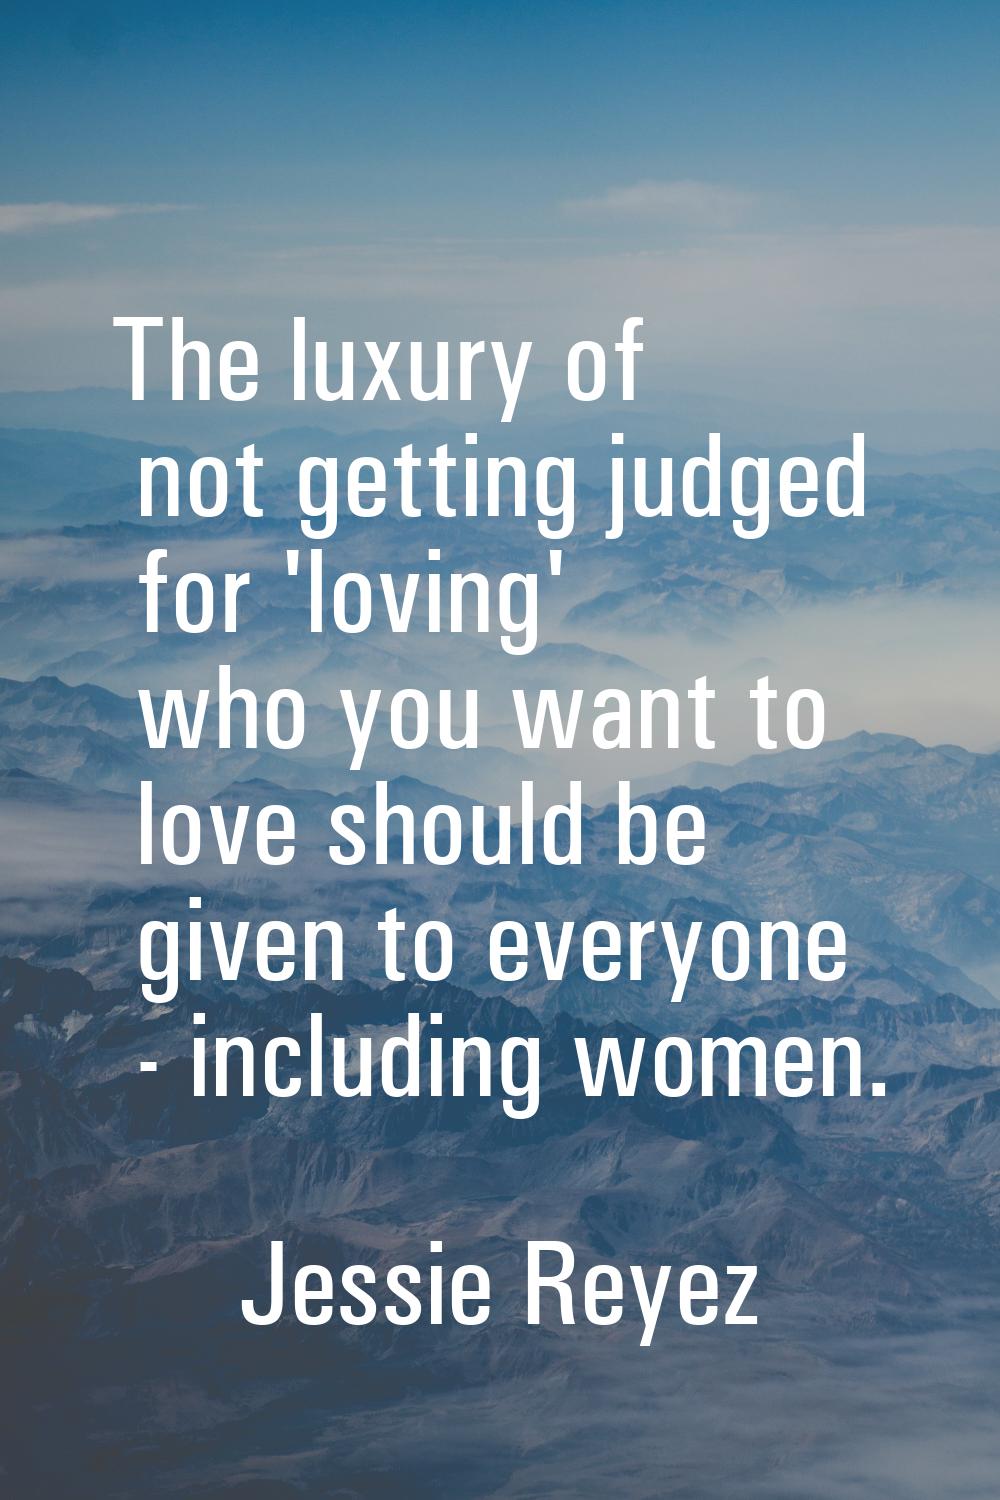 The luxury of not getting judged for 'loving' who you want to love should be given to everyone - in